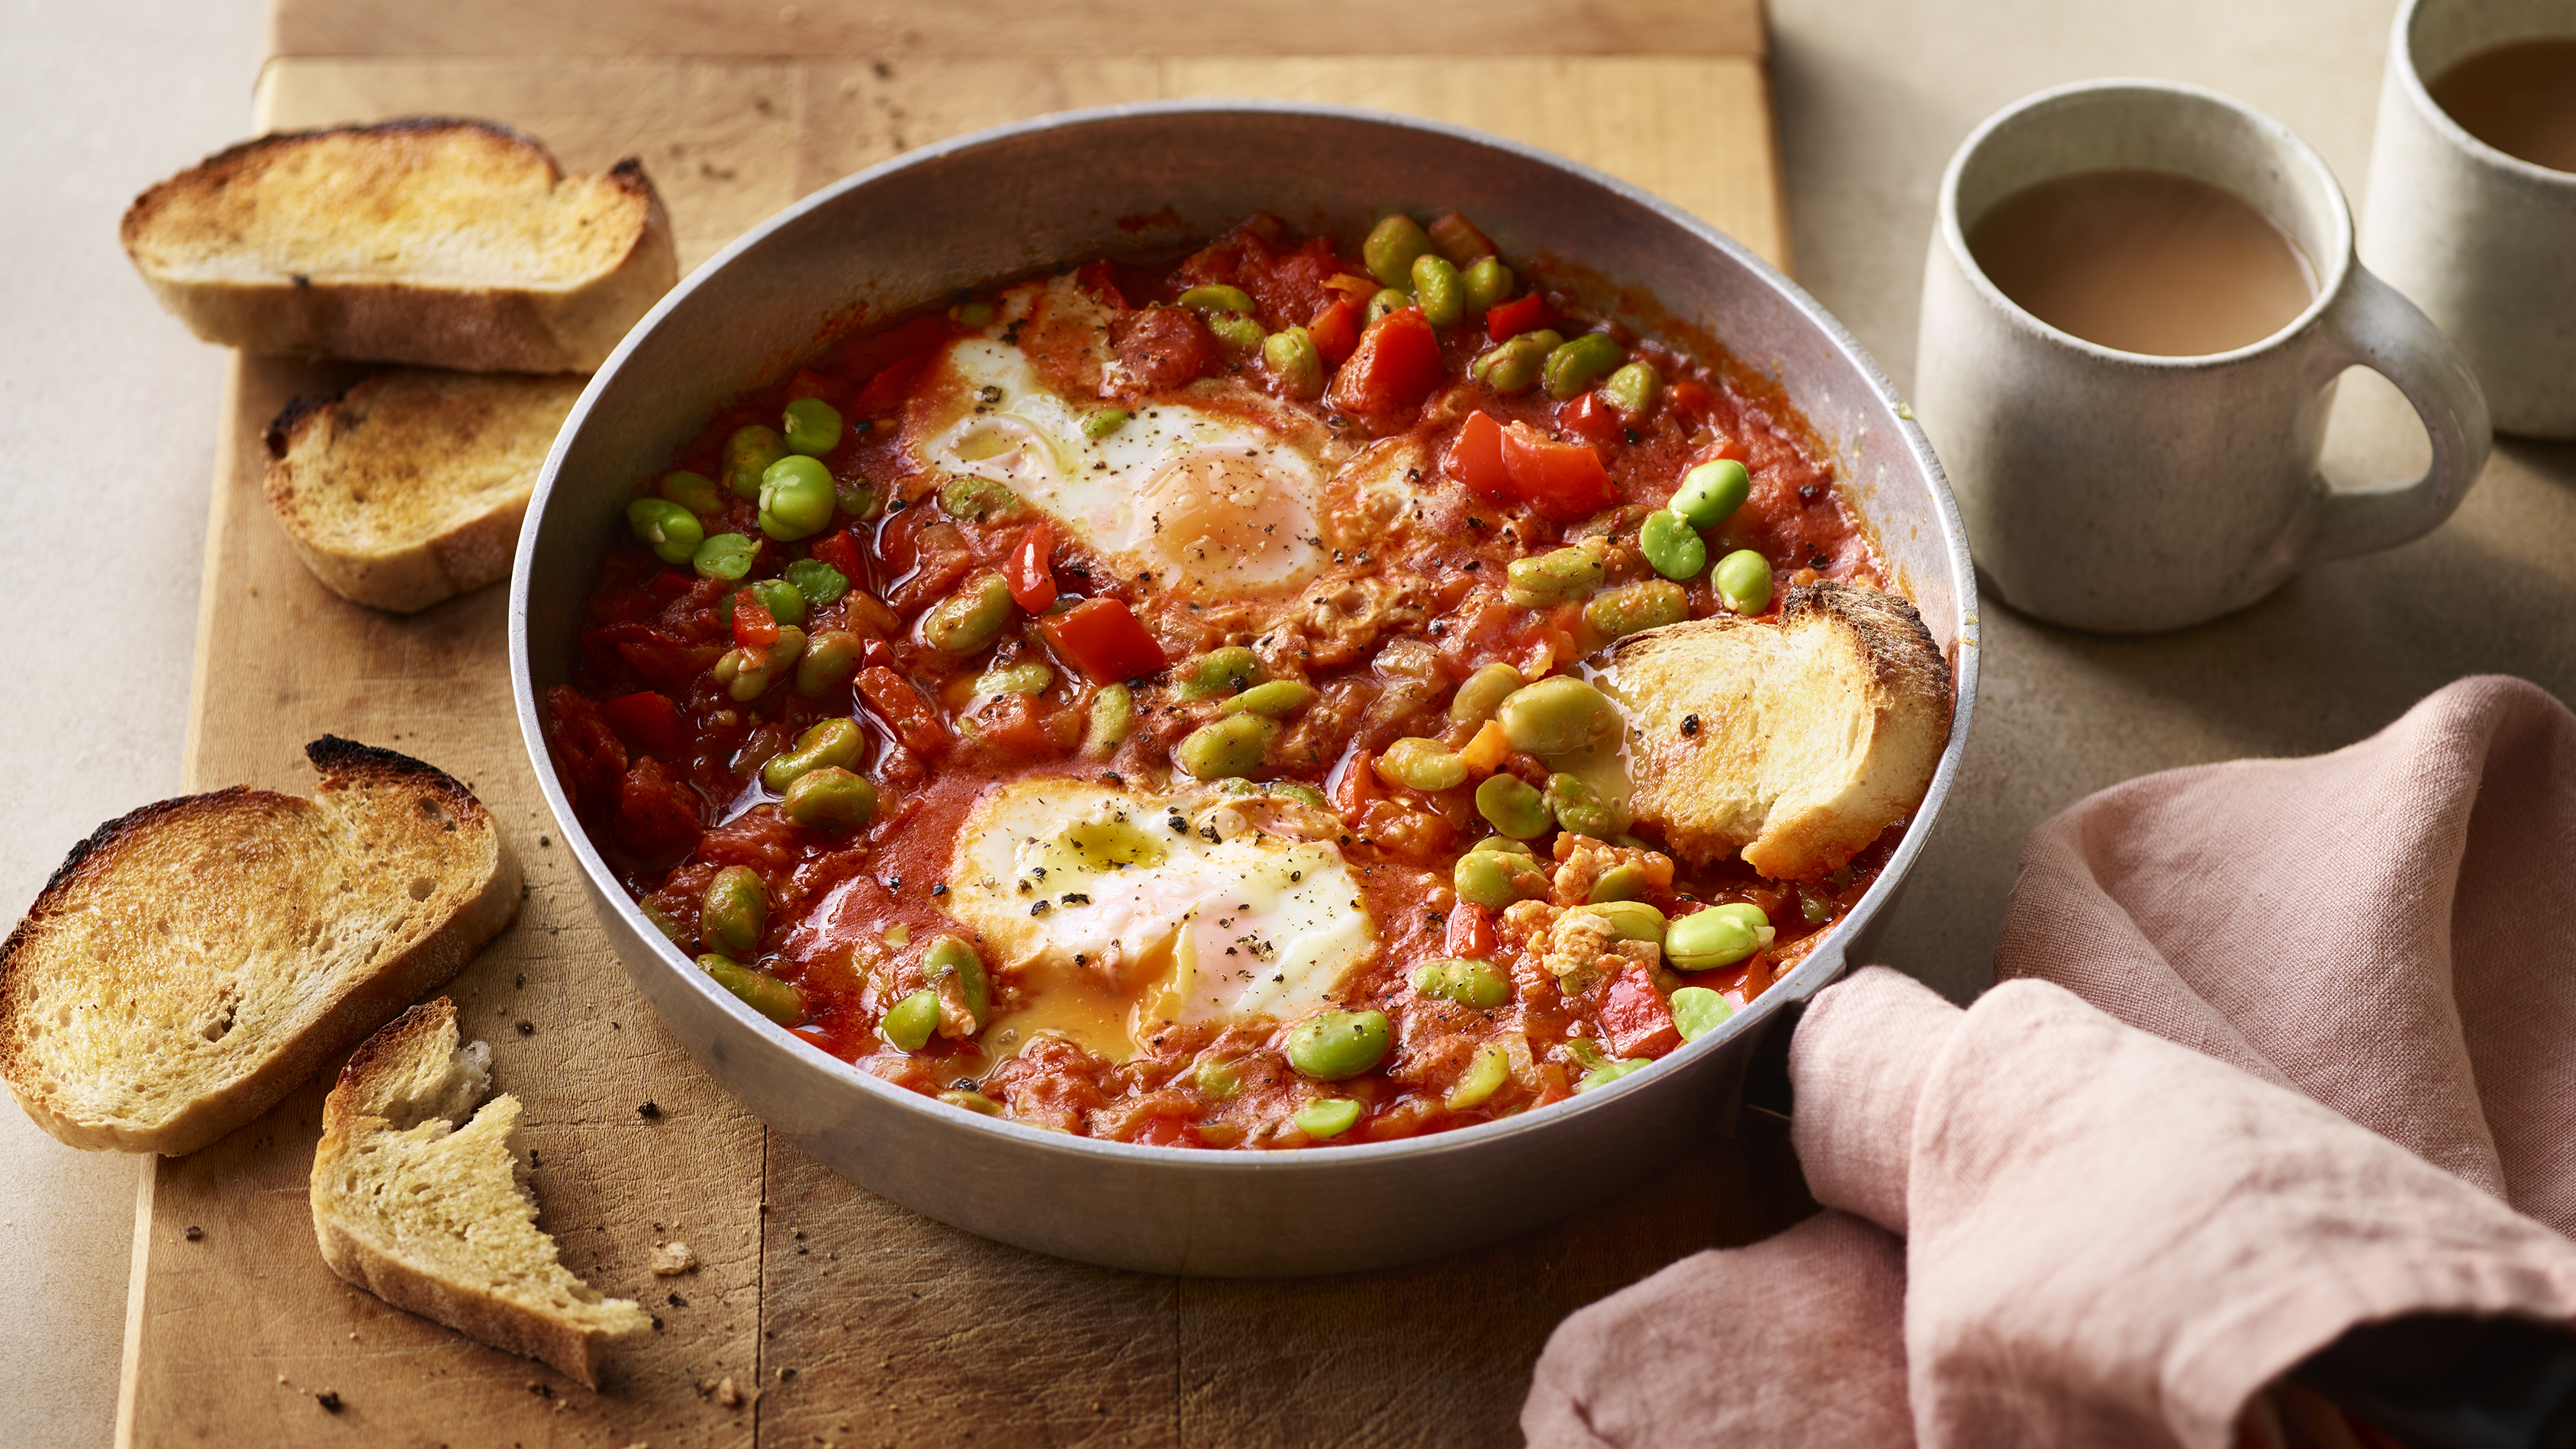 https://food-images.files.bbci.co.uk/food/recipes/healthy_egg_breakfast_47934_16x9.jpg